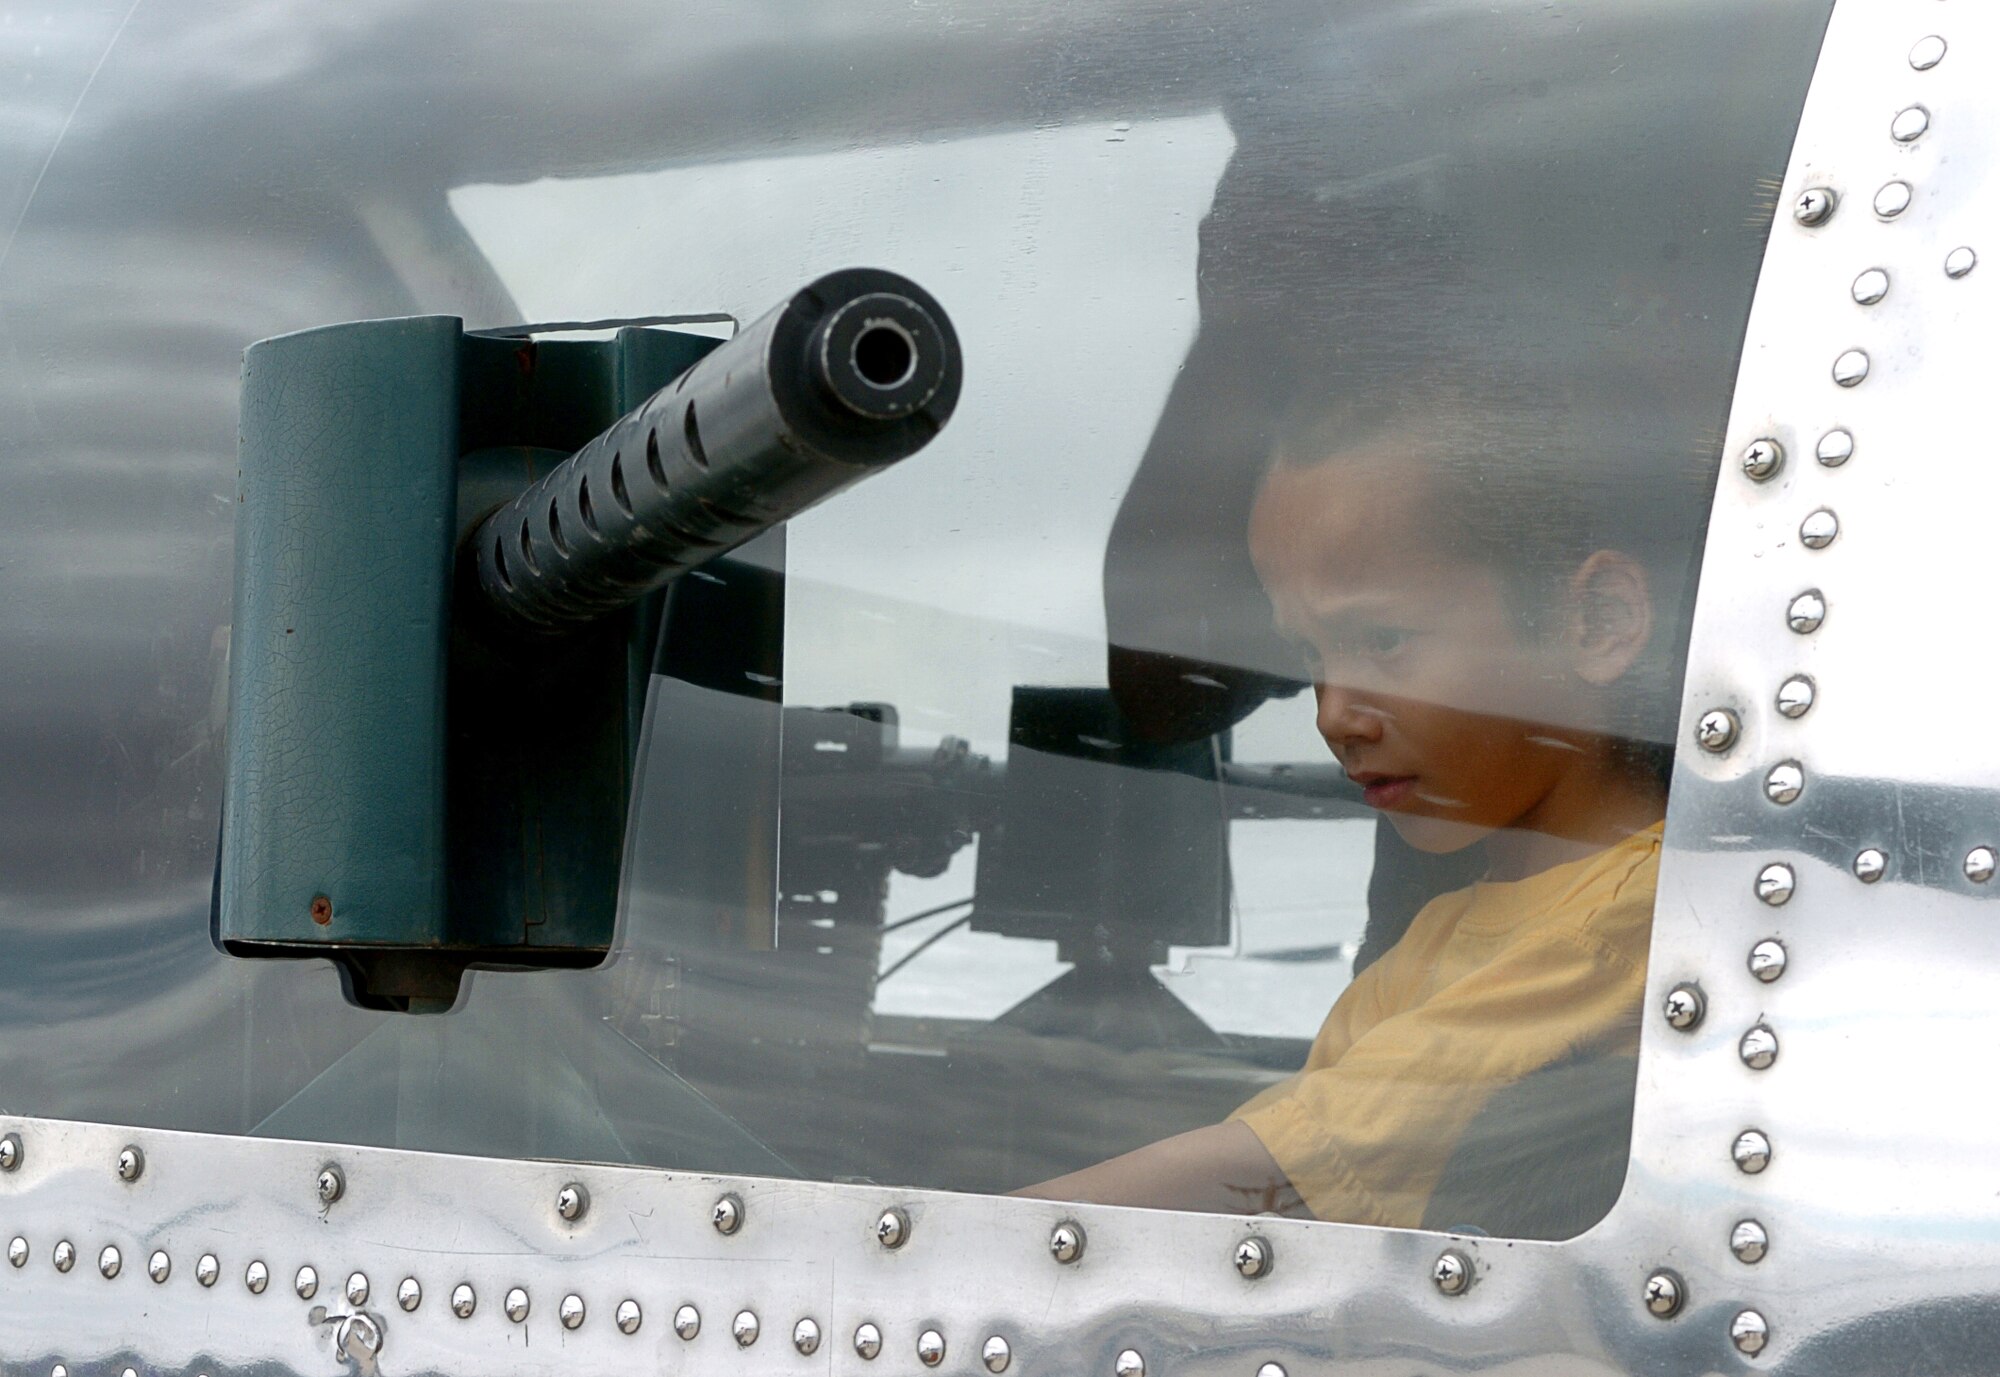 A young boy checks out the gun in a 1944 B-17 during "The Show of Force 2007, From Heritage to Horizons Air Show" at Luke Air Force Base, Ariz., March 24.  The show was part of Air Force Week, a week-long event designed to highlight the amazing things the Air Force is doing around the globe and to show appreciation to the local community for its support.  (U.S. Air Force photo/Staff Sgt. Brian Ferguson)